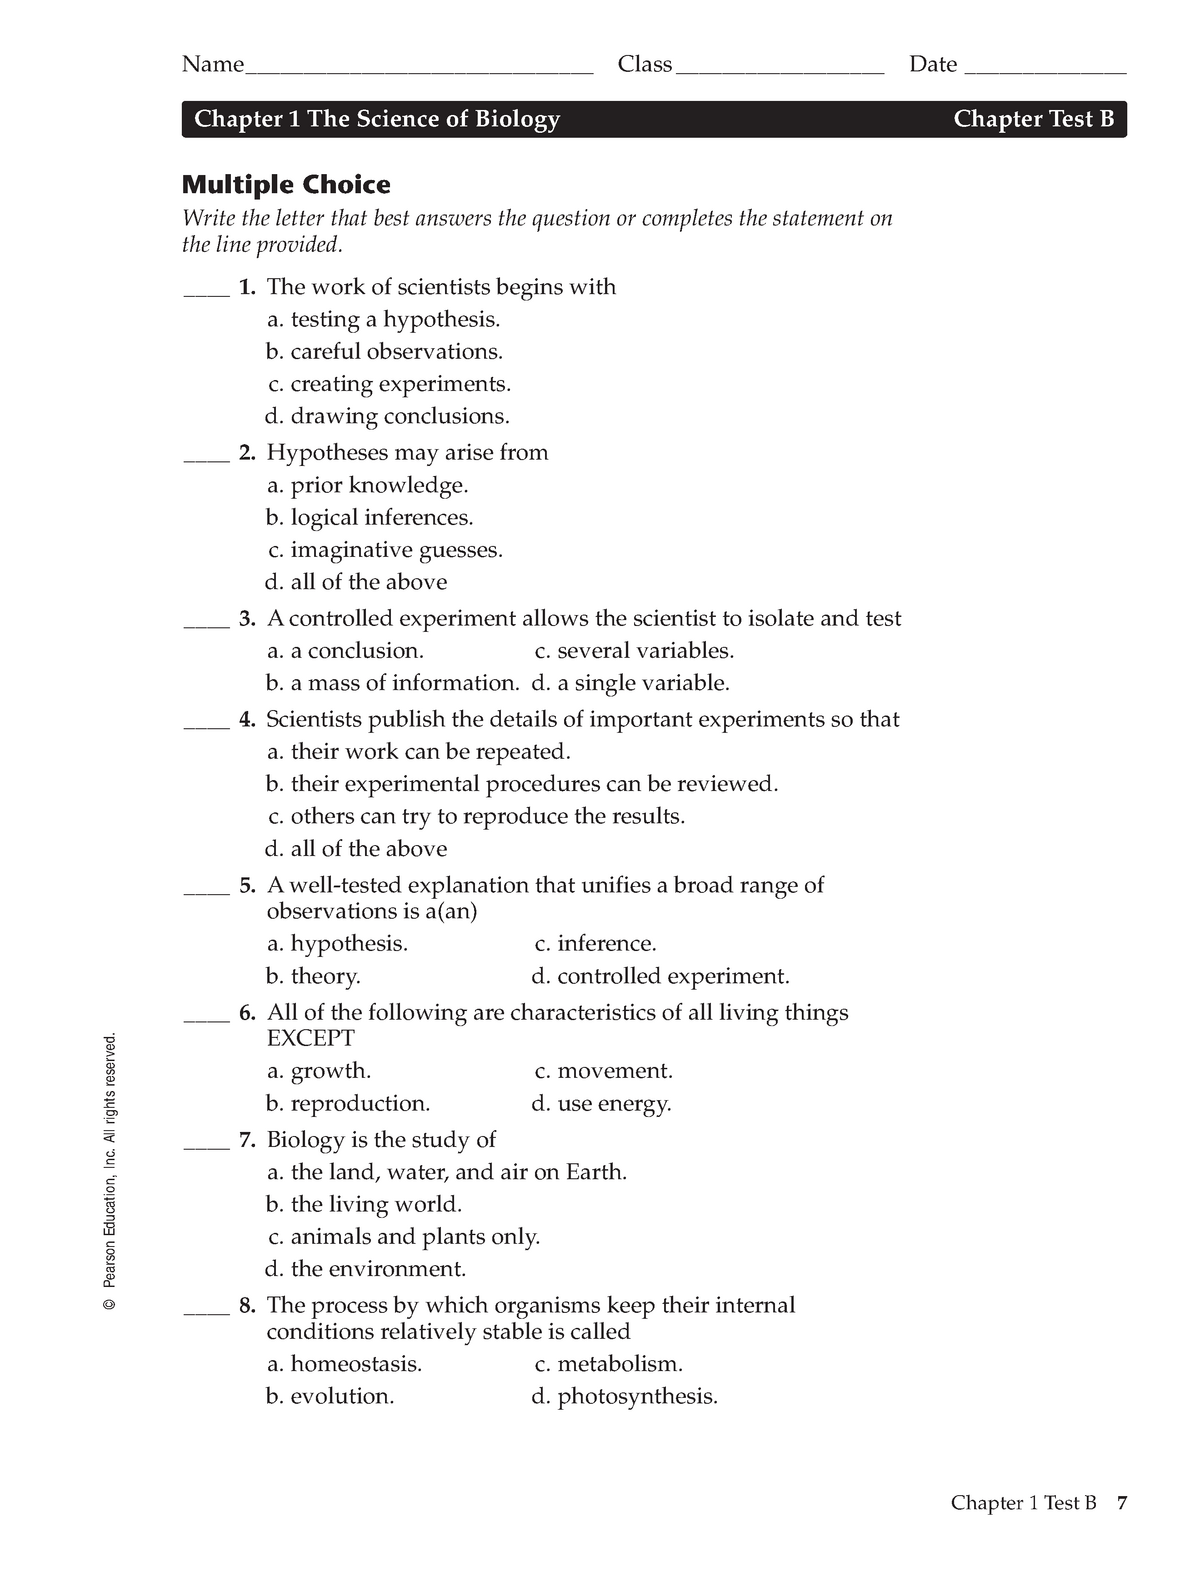 Ch 1 Practice Test The Science Of Biology Chapter 1 The Science Of